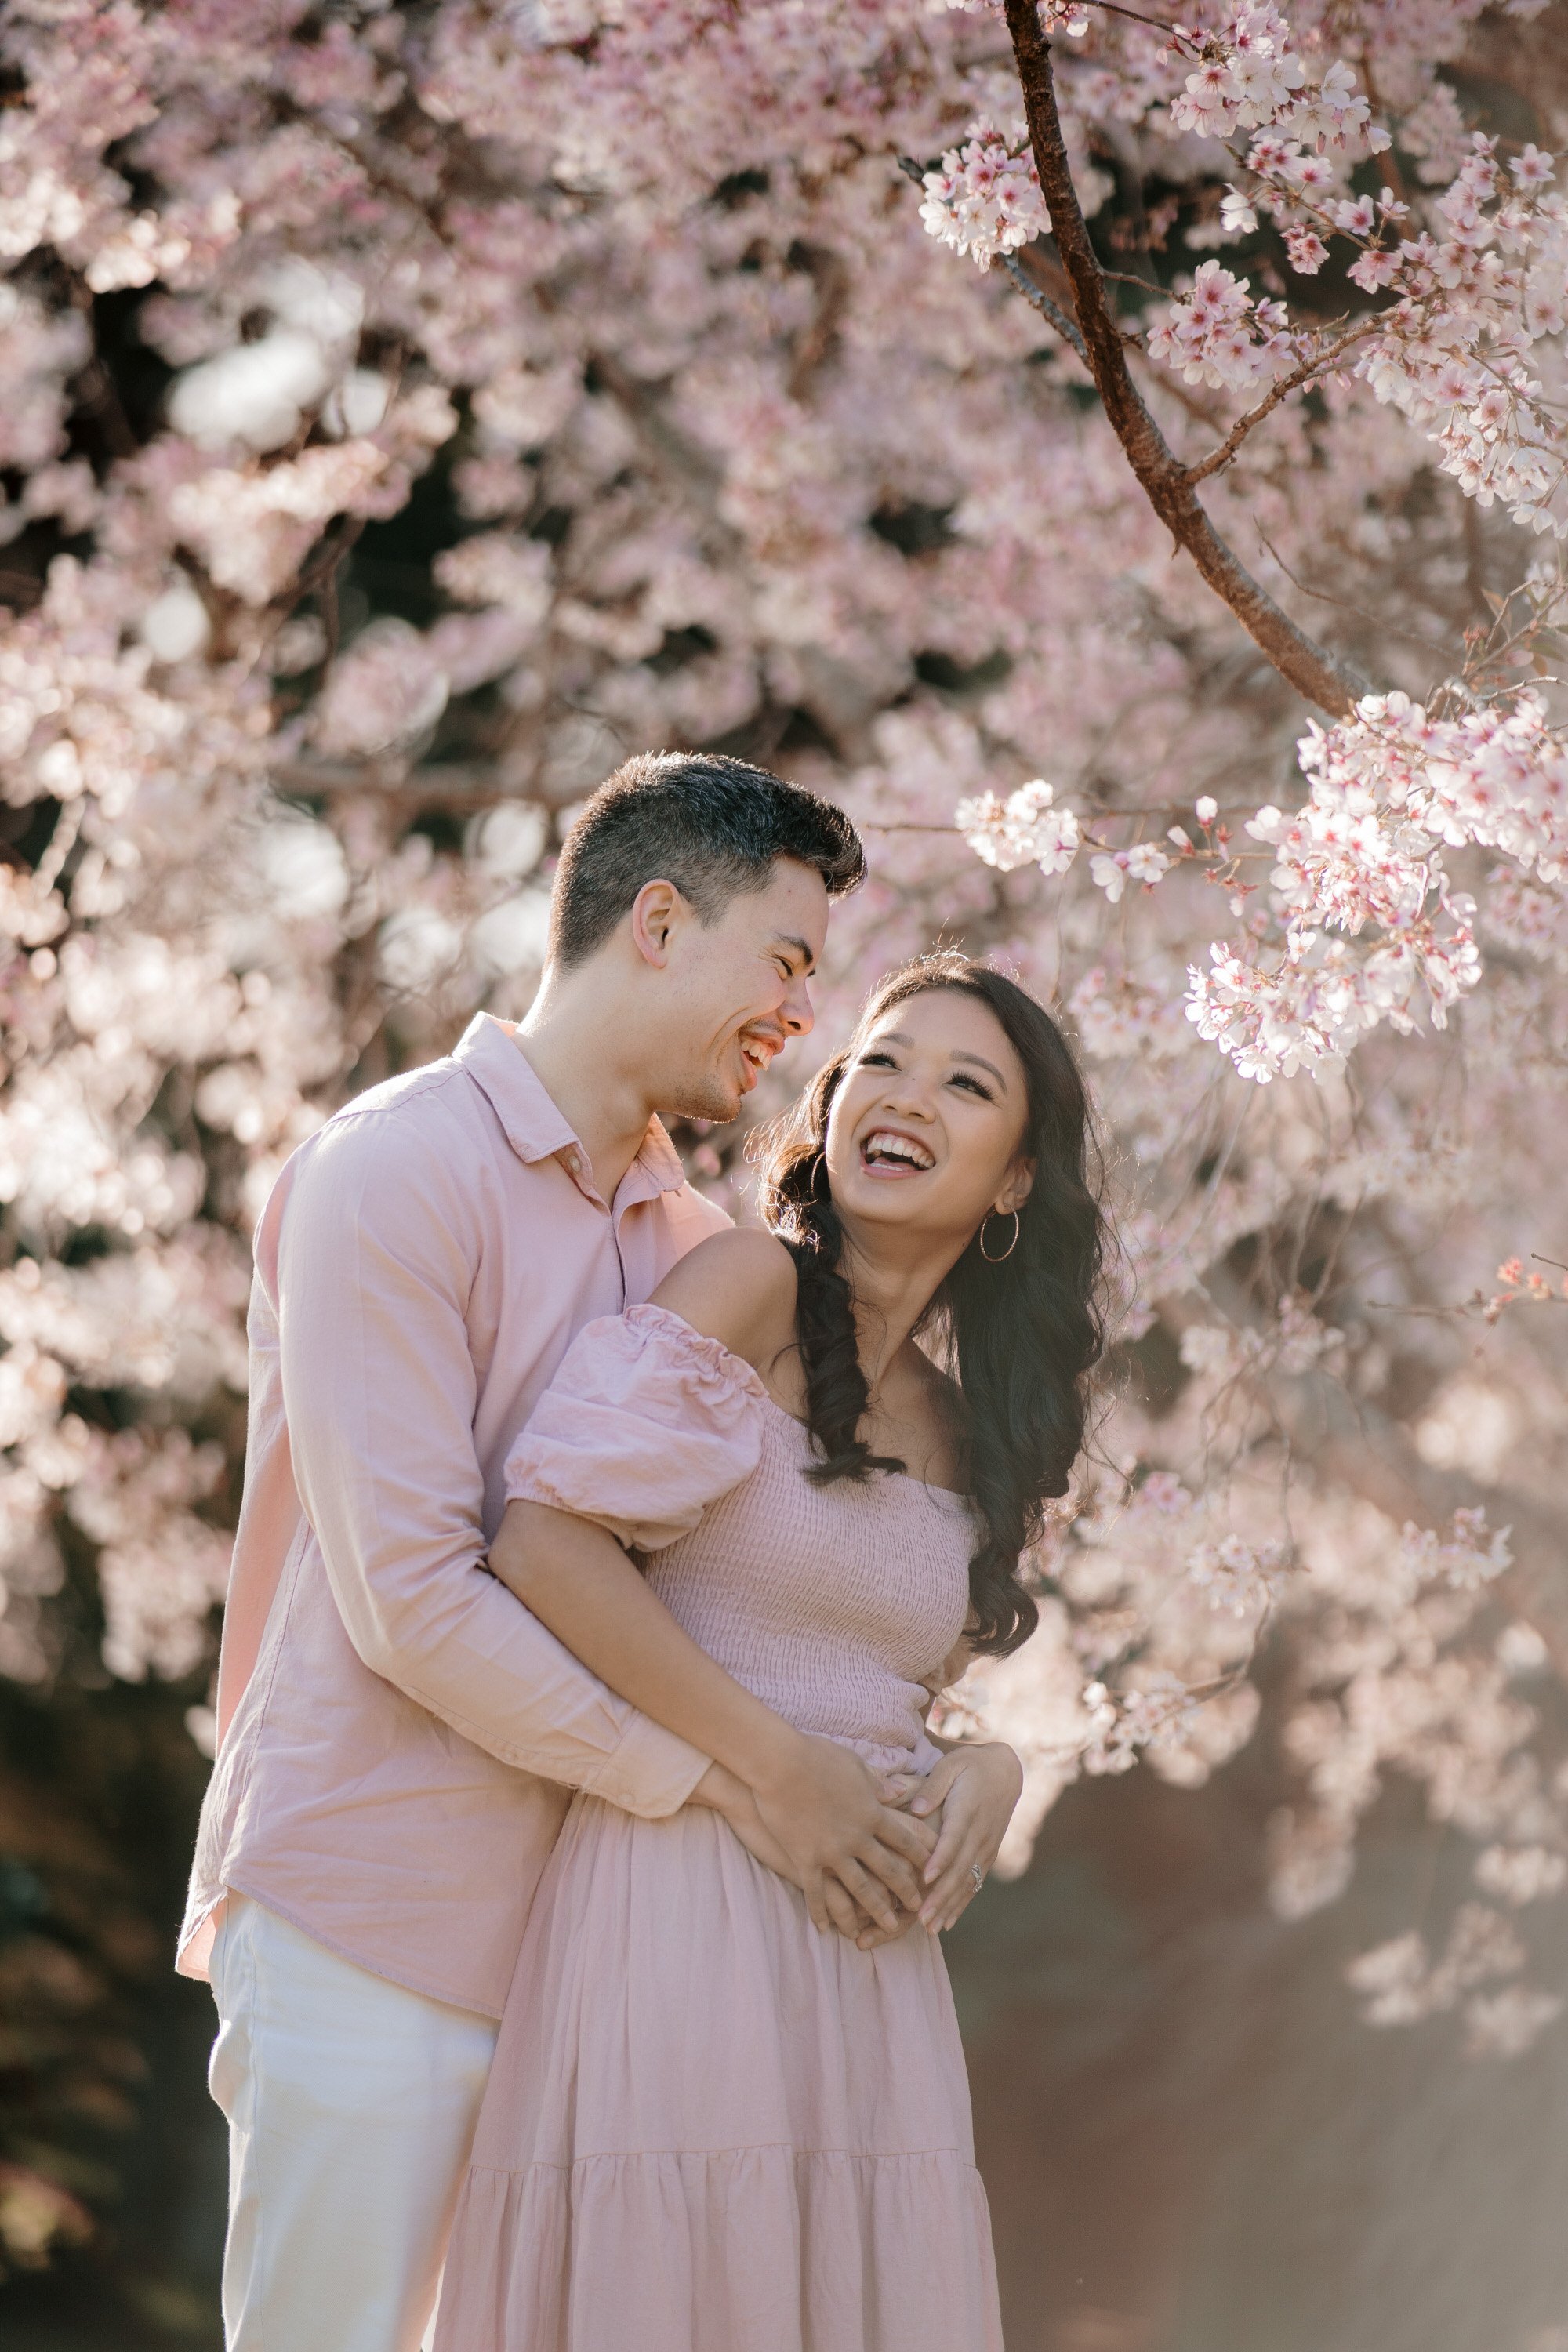 nate-and-thea-singers-duo-2023-top-auckland-wedding-phtographer-photography-videography-film-new-zealand-NZ-best-band-cherry-blossom-botanical-garden-engagement-elopement-dear-white-productions (35).jpg